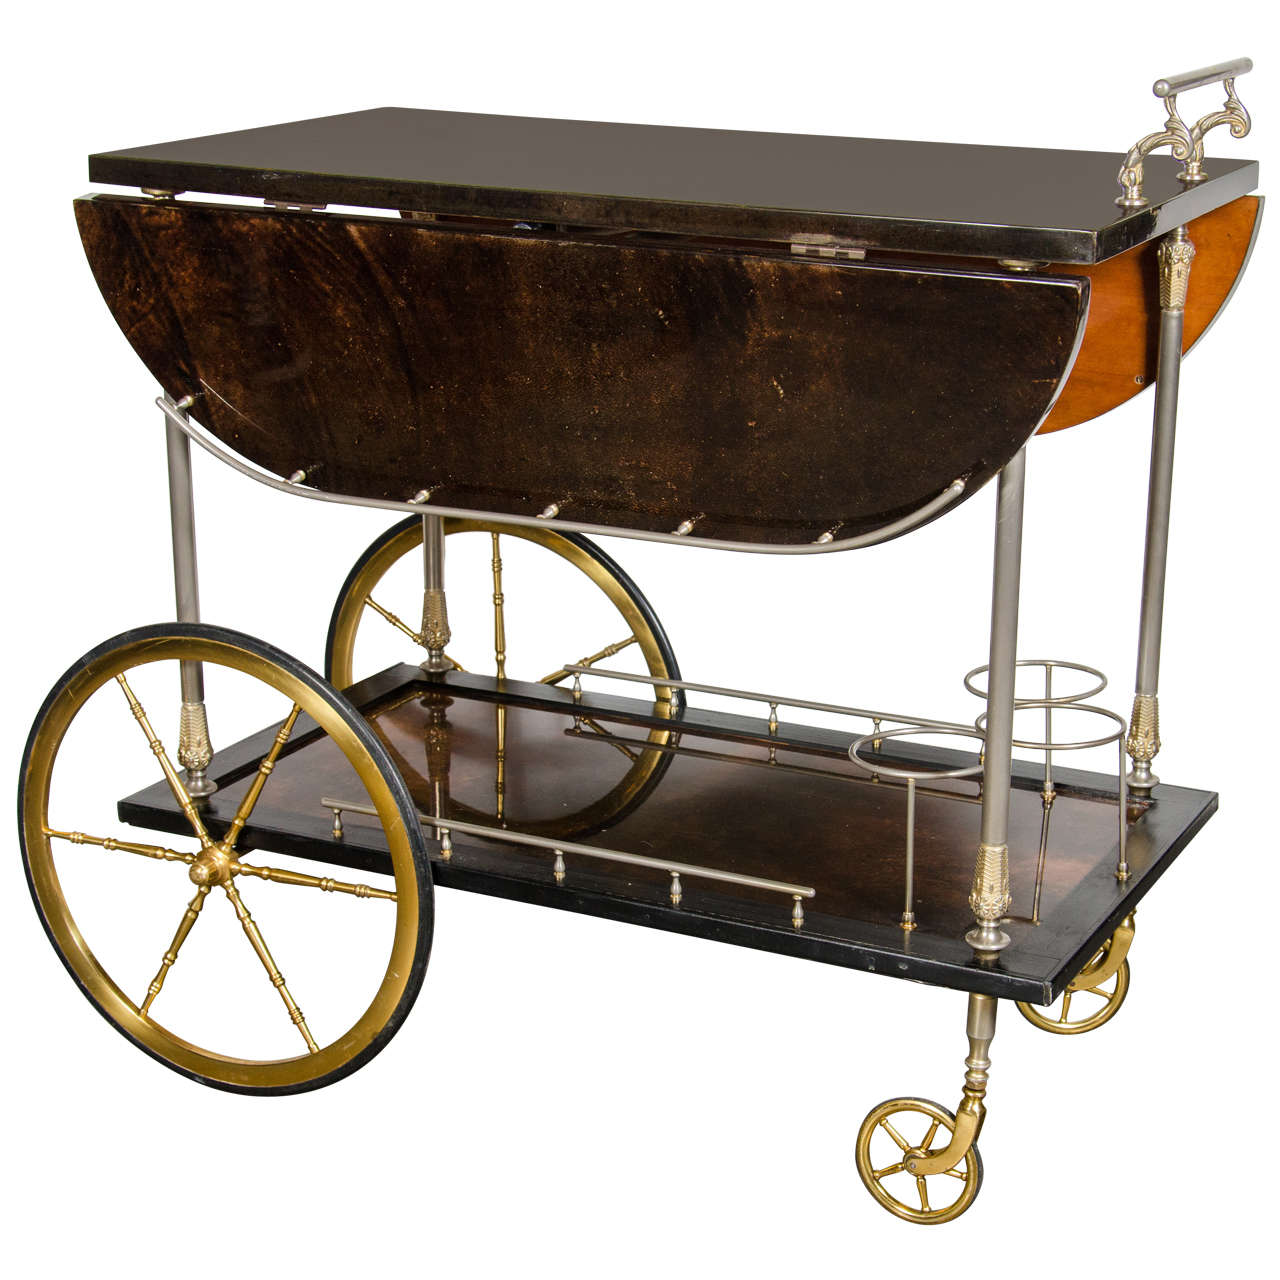 Luxe Lacquered Goat Skin Bar or Serving Cart by Aldo Tura with Brass Fittings